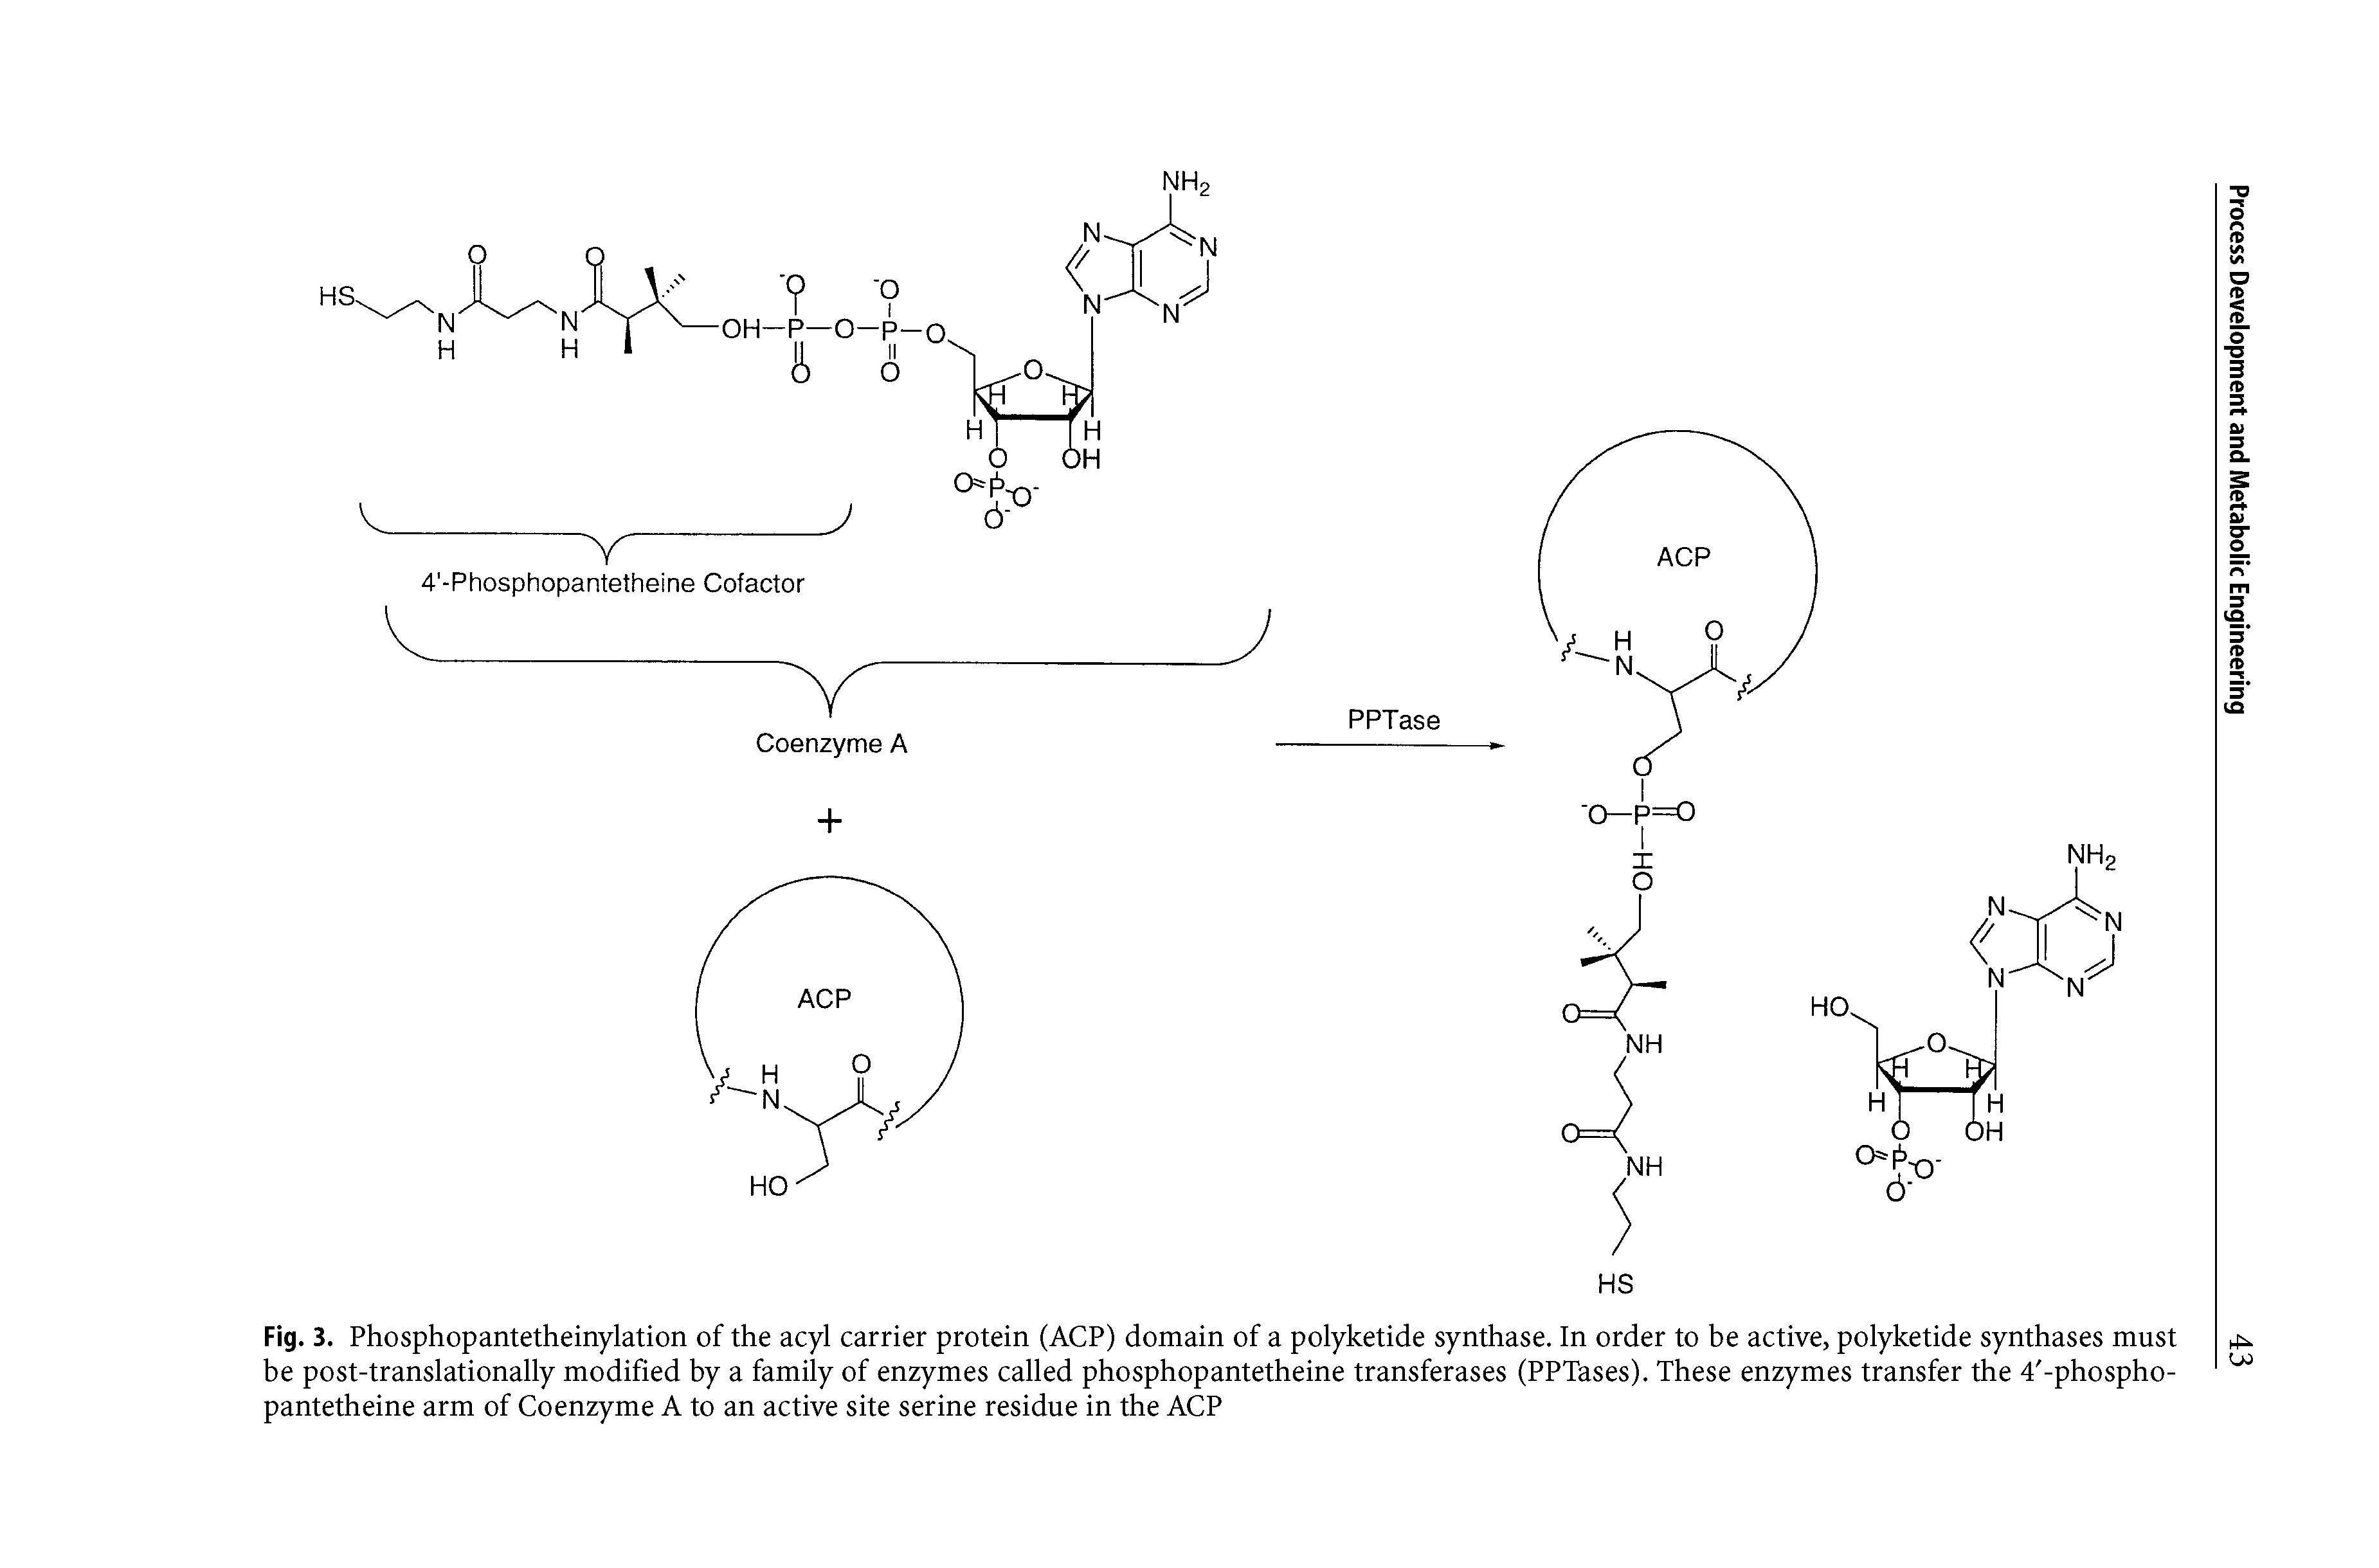 Fig. 3. Phosphopantetheinylation of the acyl carrier protein (AGP) domain of a polyketide synthase. In order to be active, polyketide synthases must be post-translationally modified by a family of enzymes called phosphopantetheine transferases (PPTases). These enzymes transfer the 4 -phospho-pantetheine arm of Coenzyme A to an active site serine residue in the AGP...